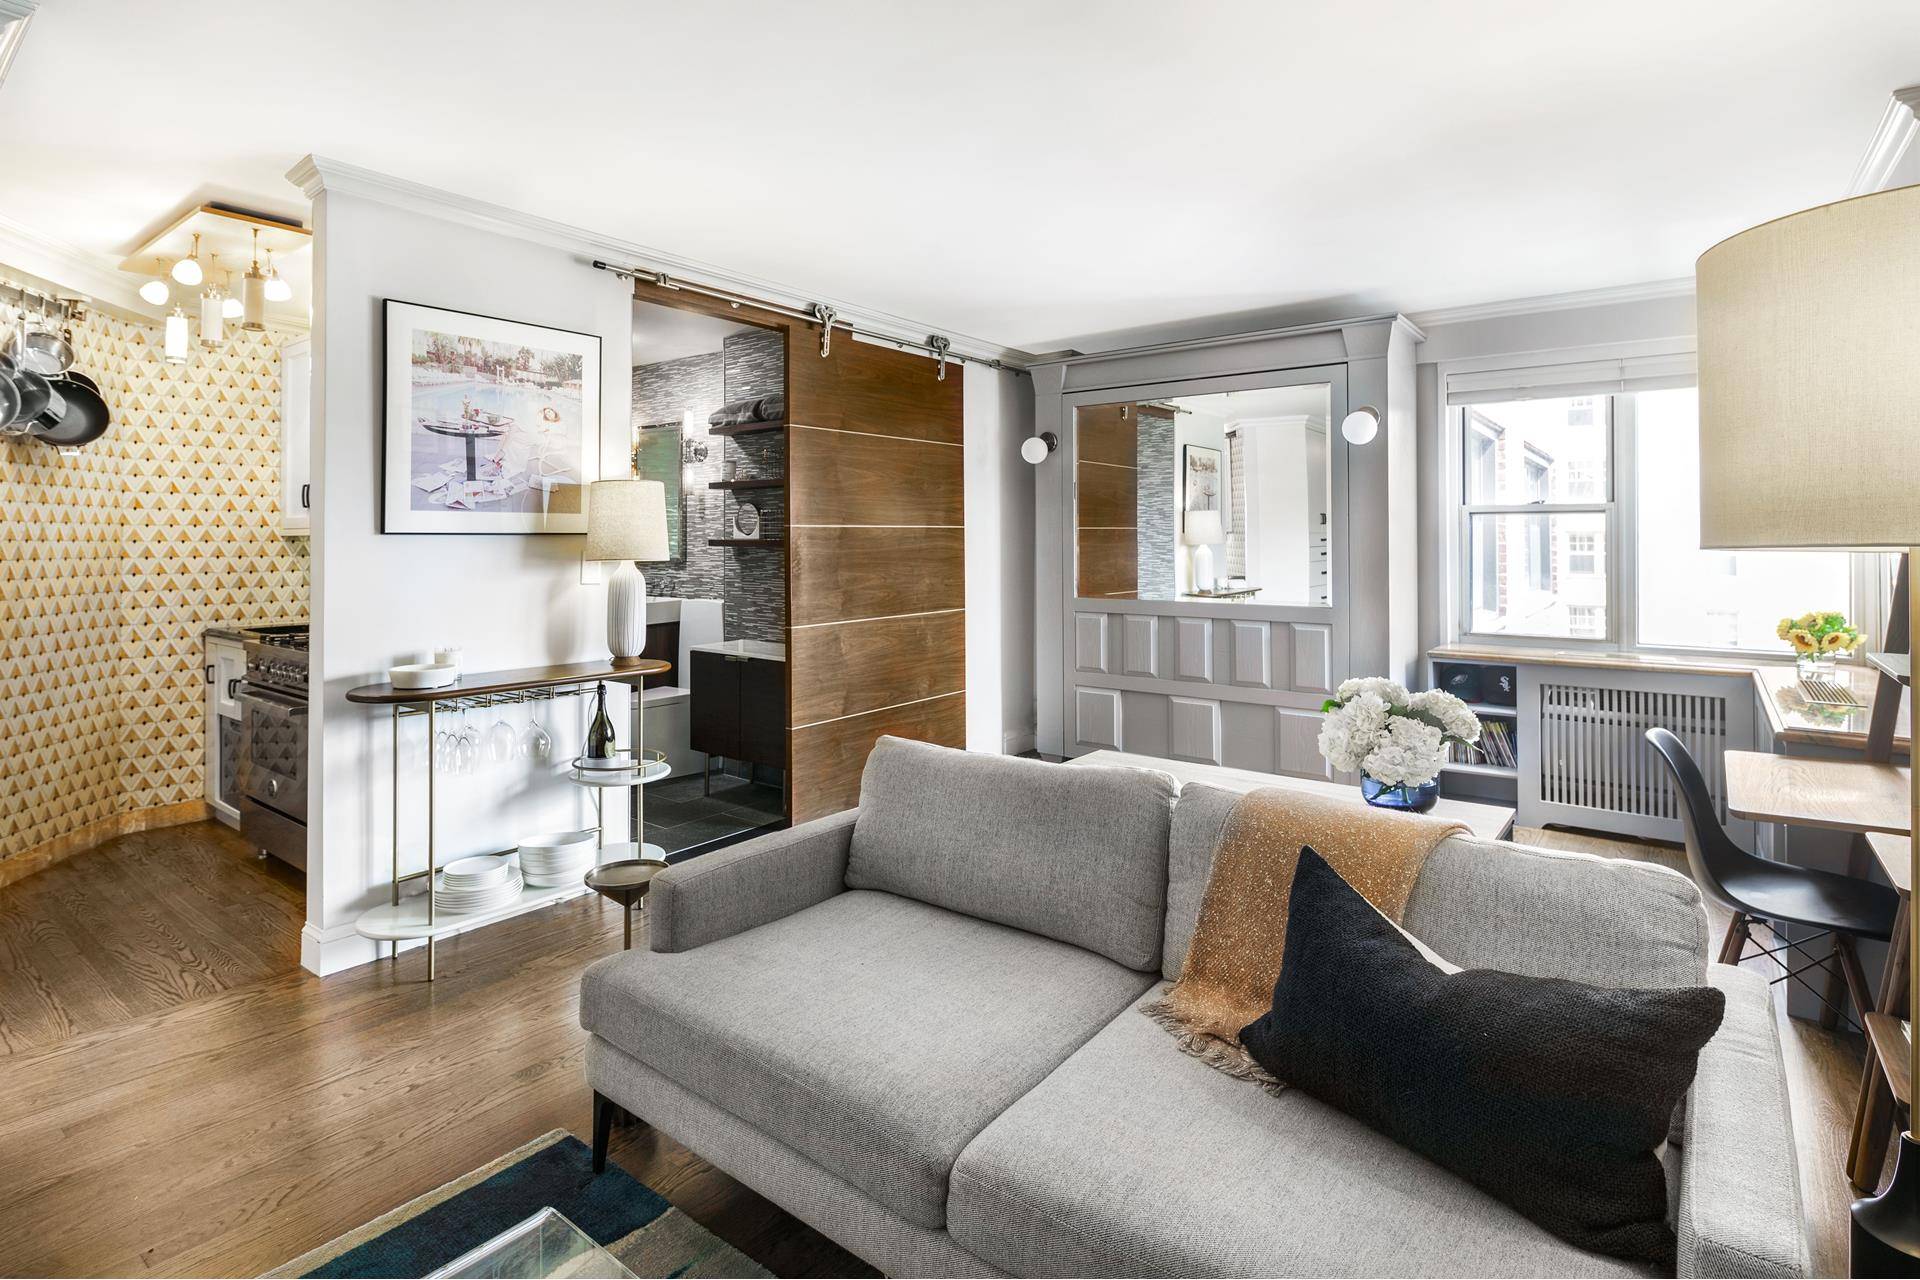 Experience West Village living at its finest in this spacious, smartly renovated corner studio apartment with unobstructed views.